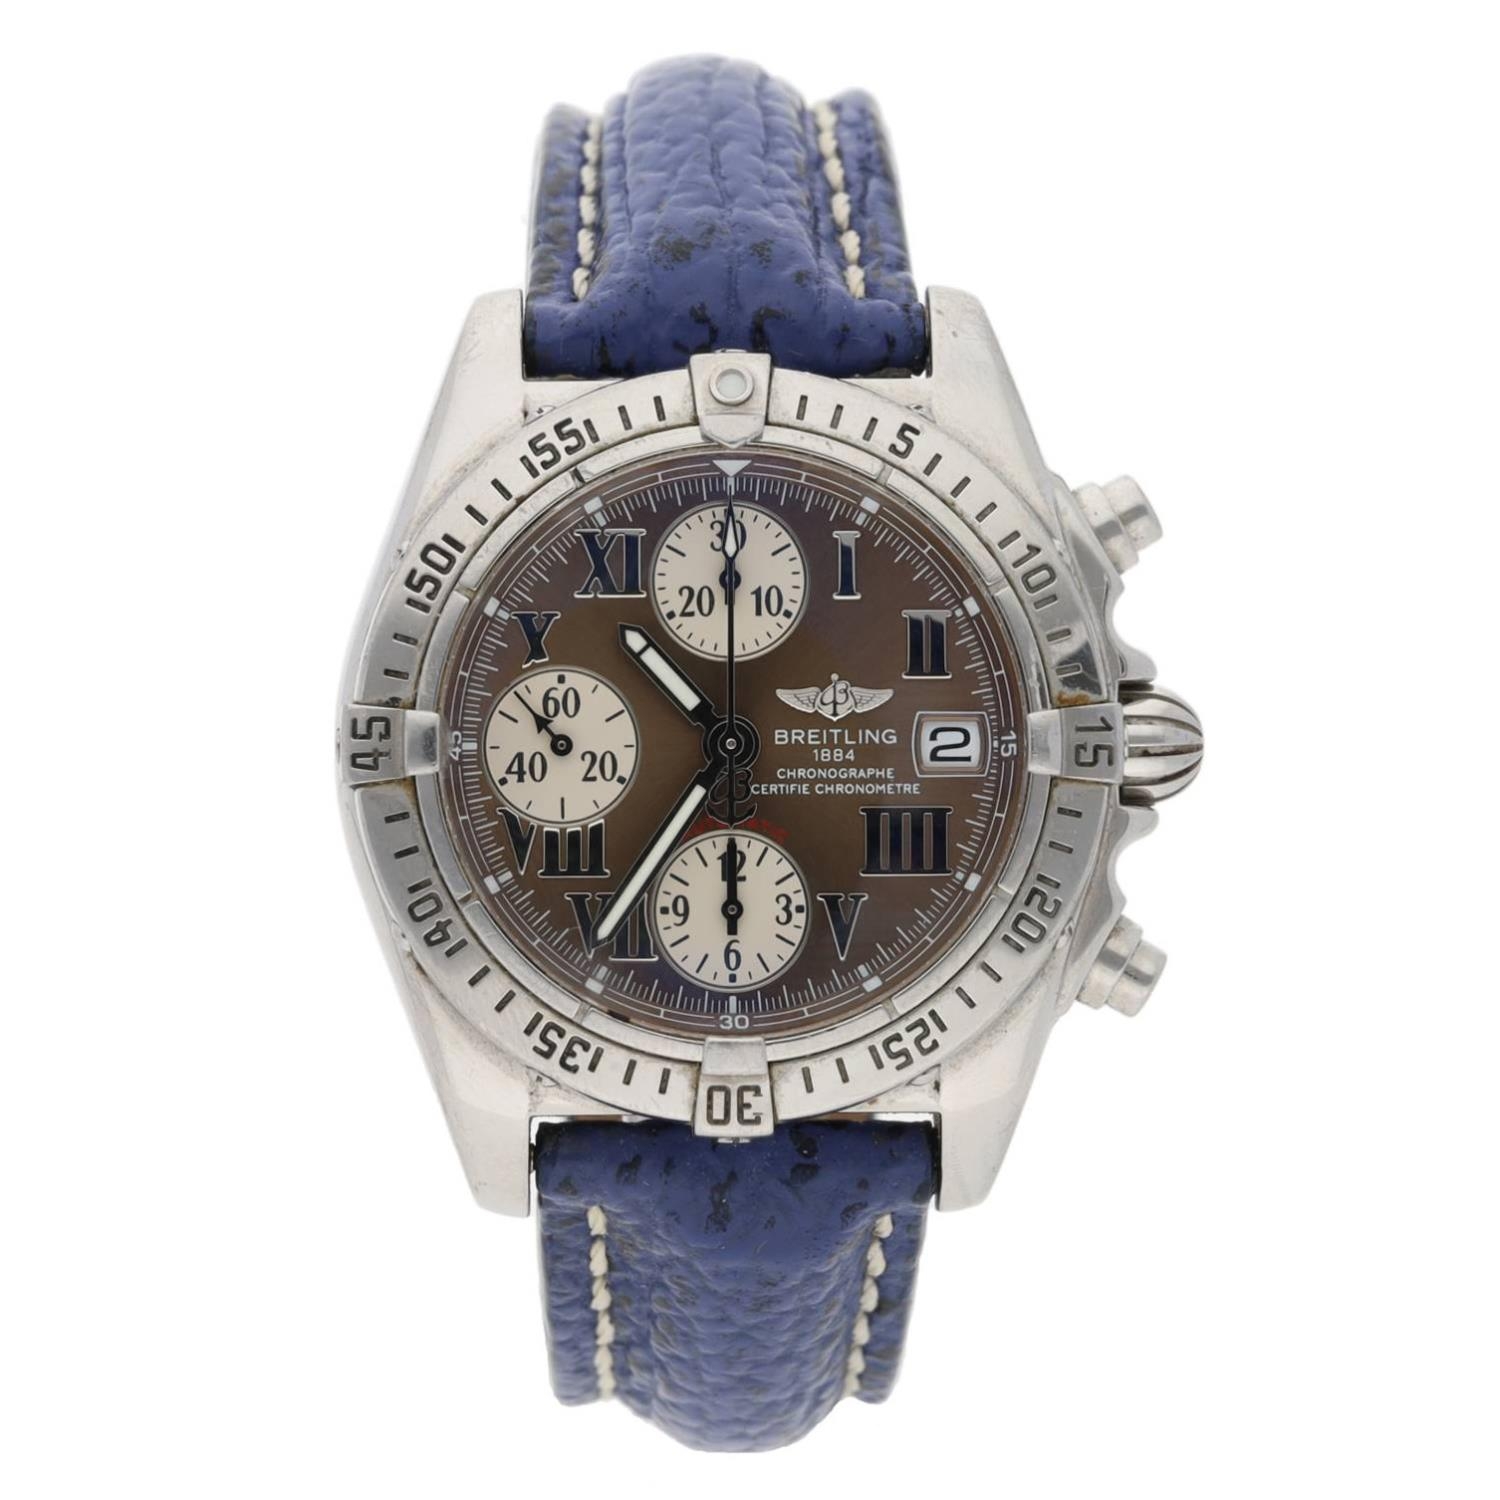 Breitling Chrono Cockpit Chronometre Chronograph automatic stainless steel gentleman's wristwatch, - Image 2 of 3